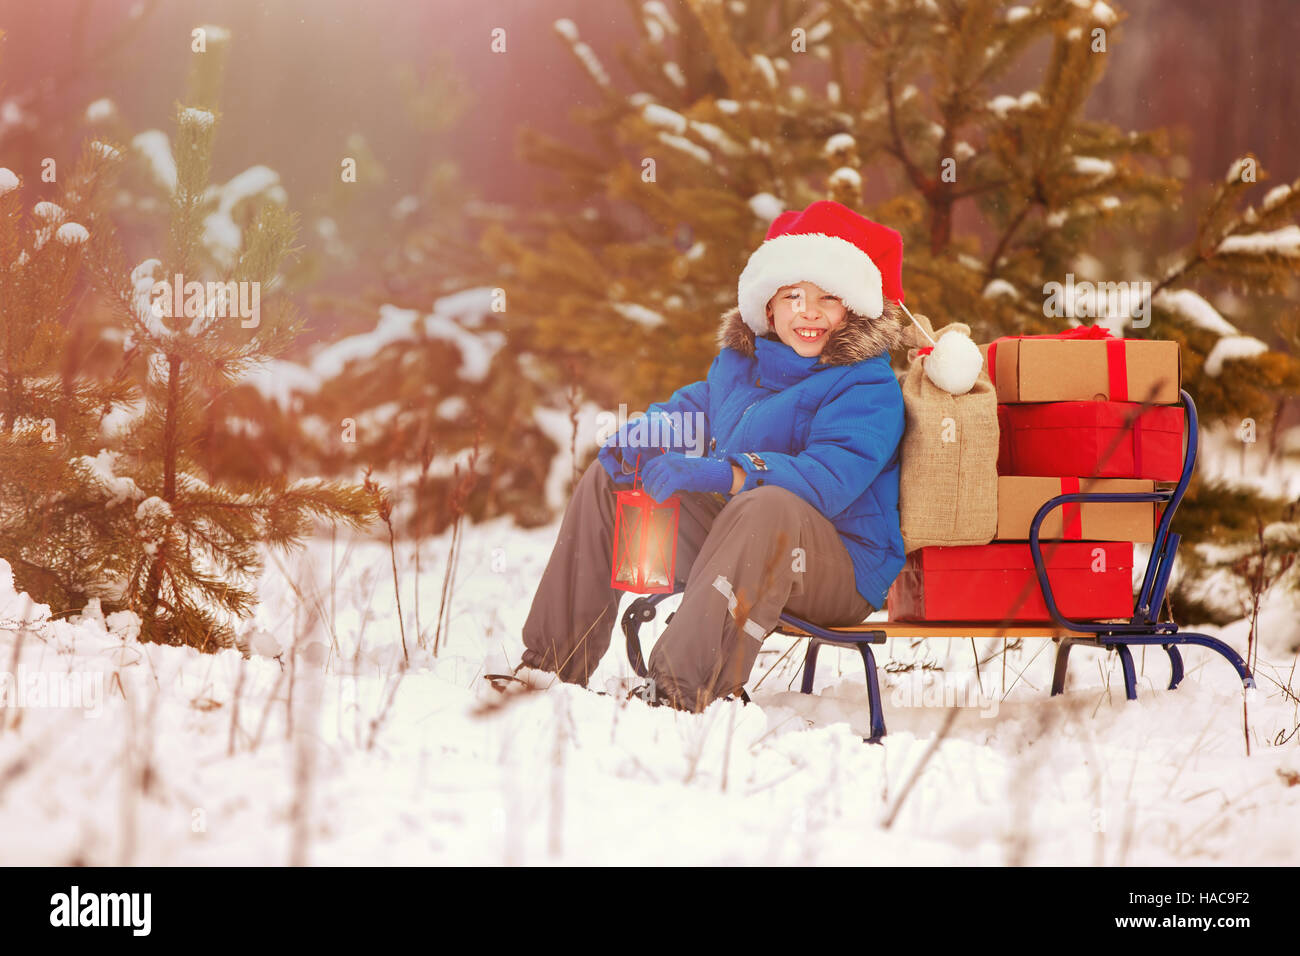 Cute little boy in Santa hat holding Christmas lantern and carries a wooden sled full of gift boxes in snowy forest. Xmas, snow and winter fun for fam Stock Photo